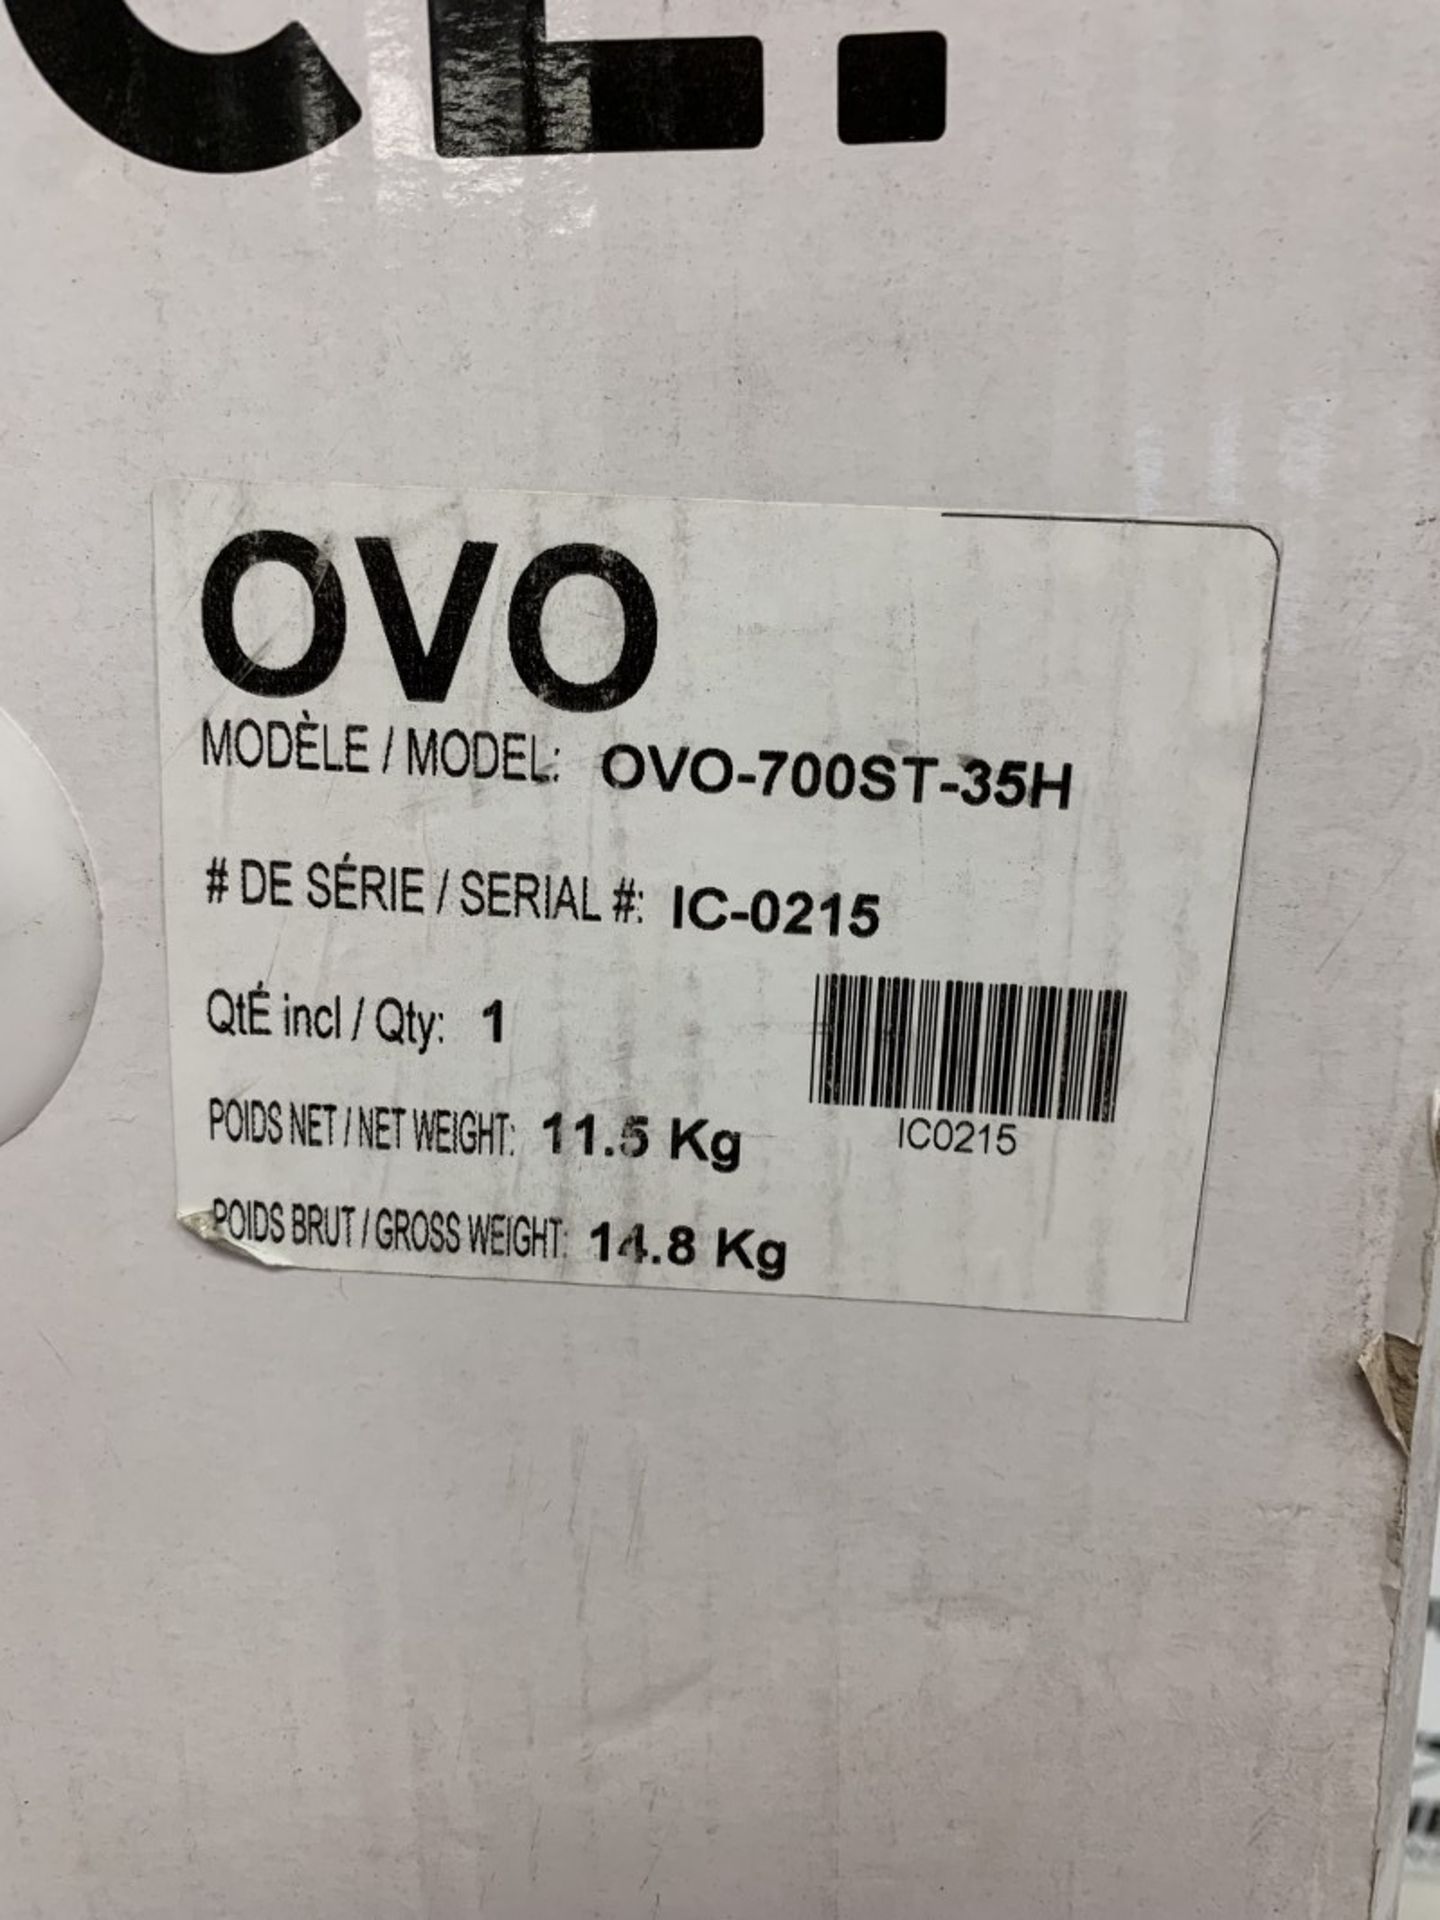 Ovo - 700St Central Vacuum System - Image 2 of 2